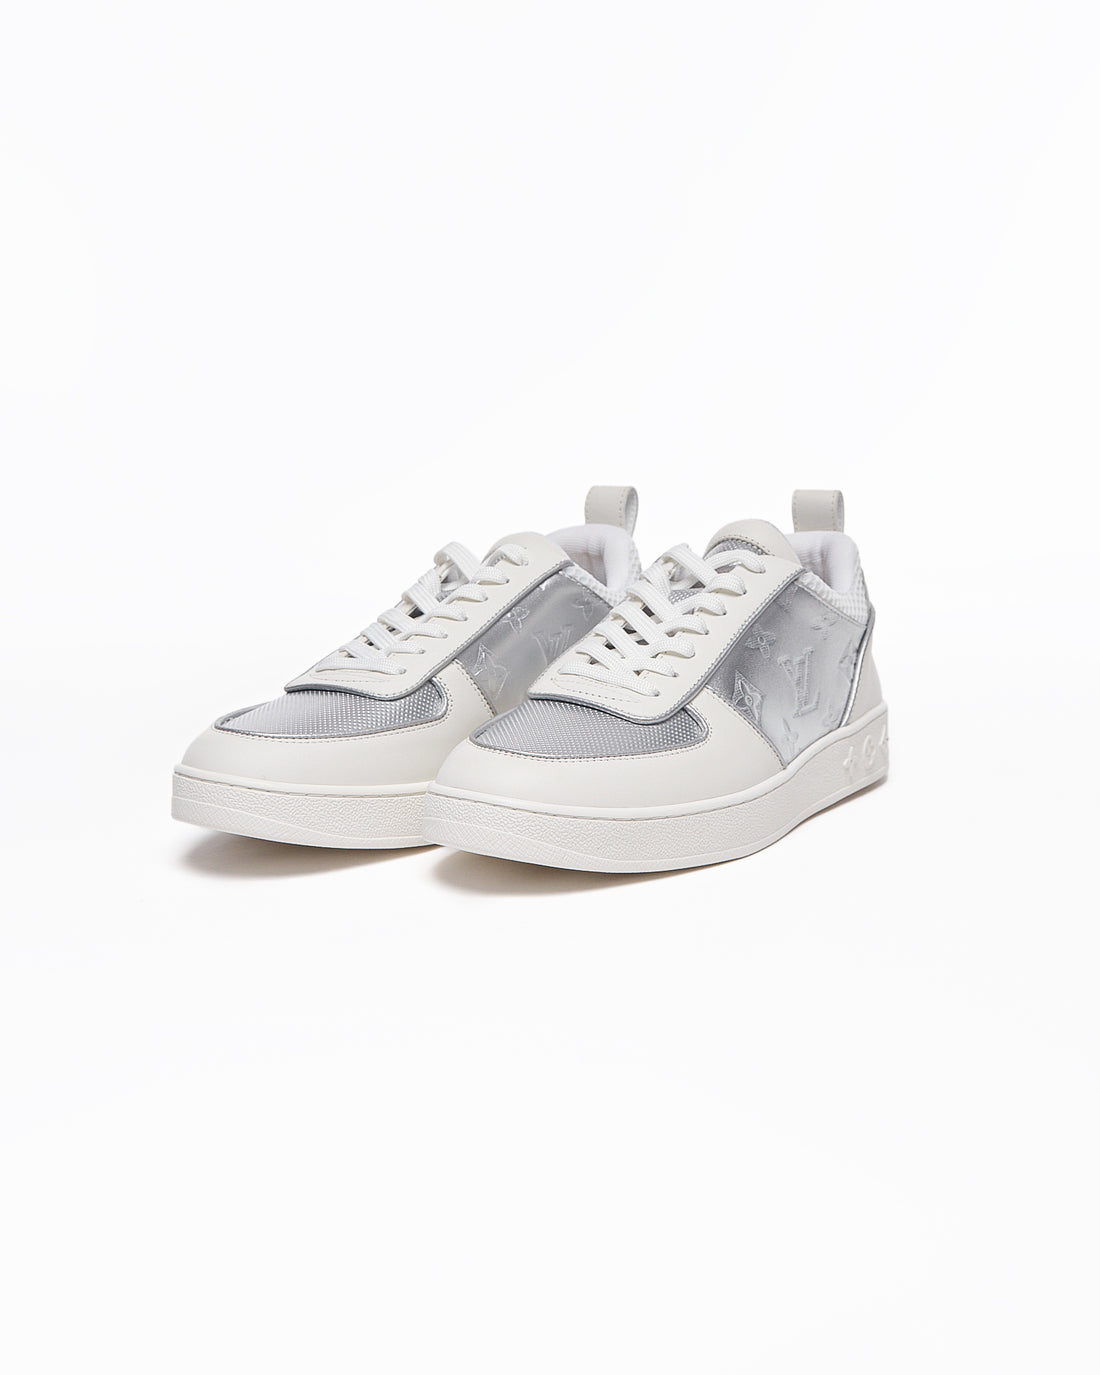 LV Monogram Silver Trainers Shoes 145.90